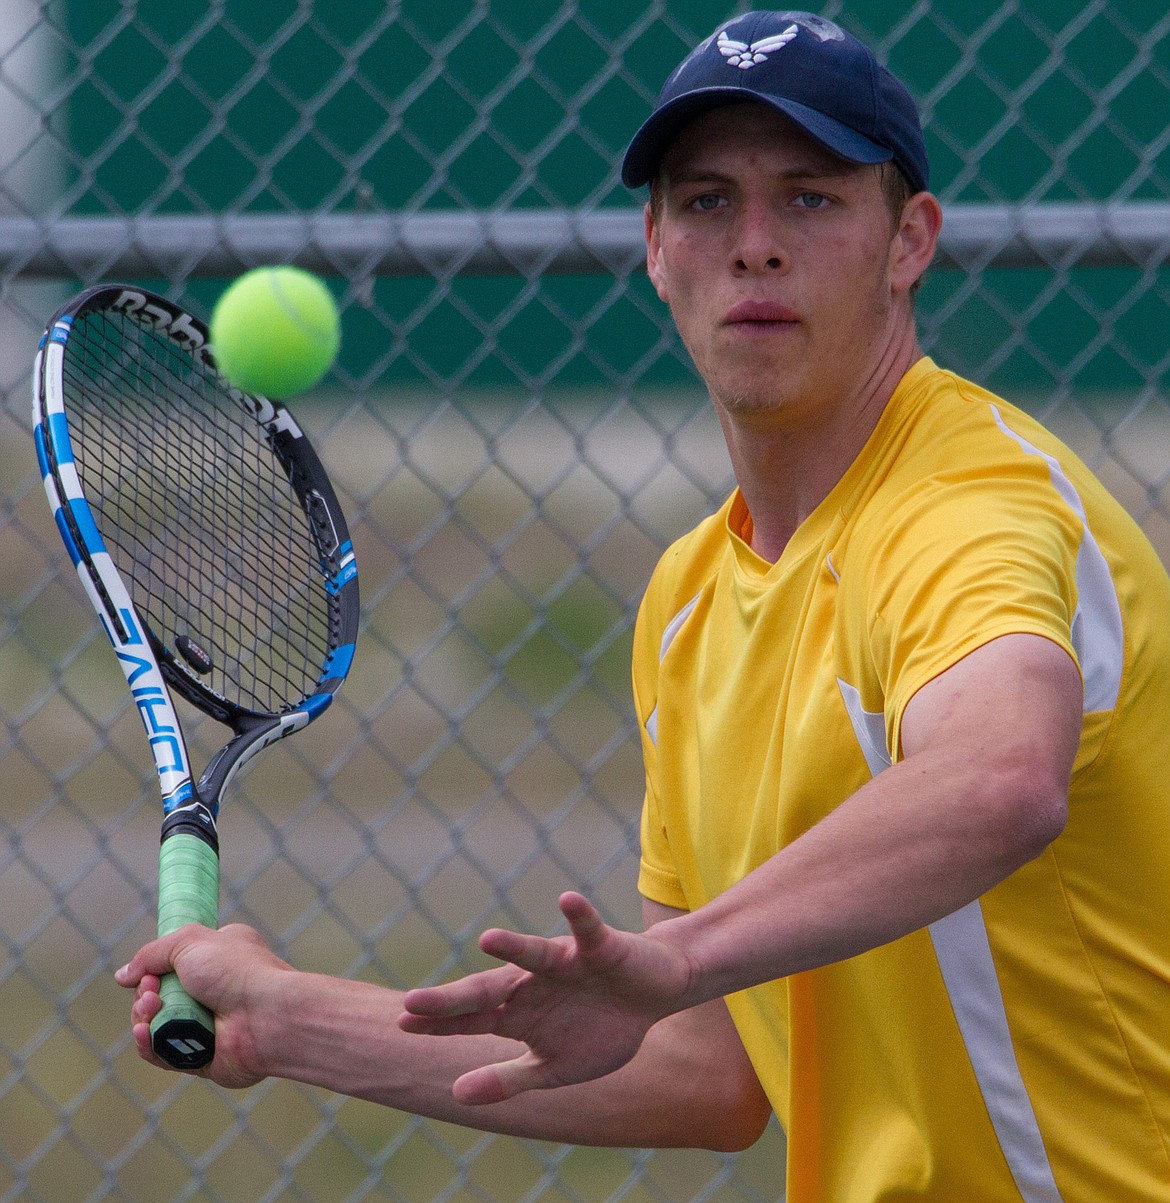 Libby High School's Colin Maloney competes in a tennis divisional in Libby Friday, May 12, 2017. (John Blodgett/The Western News)